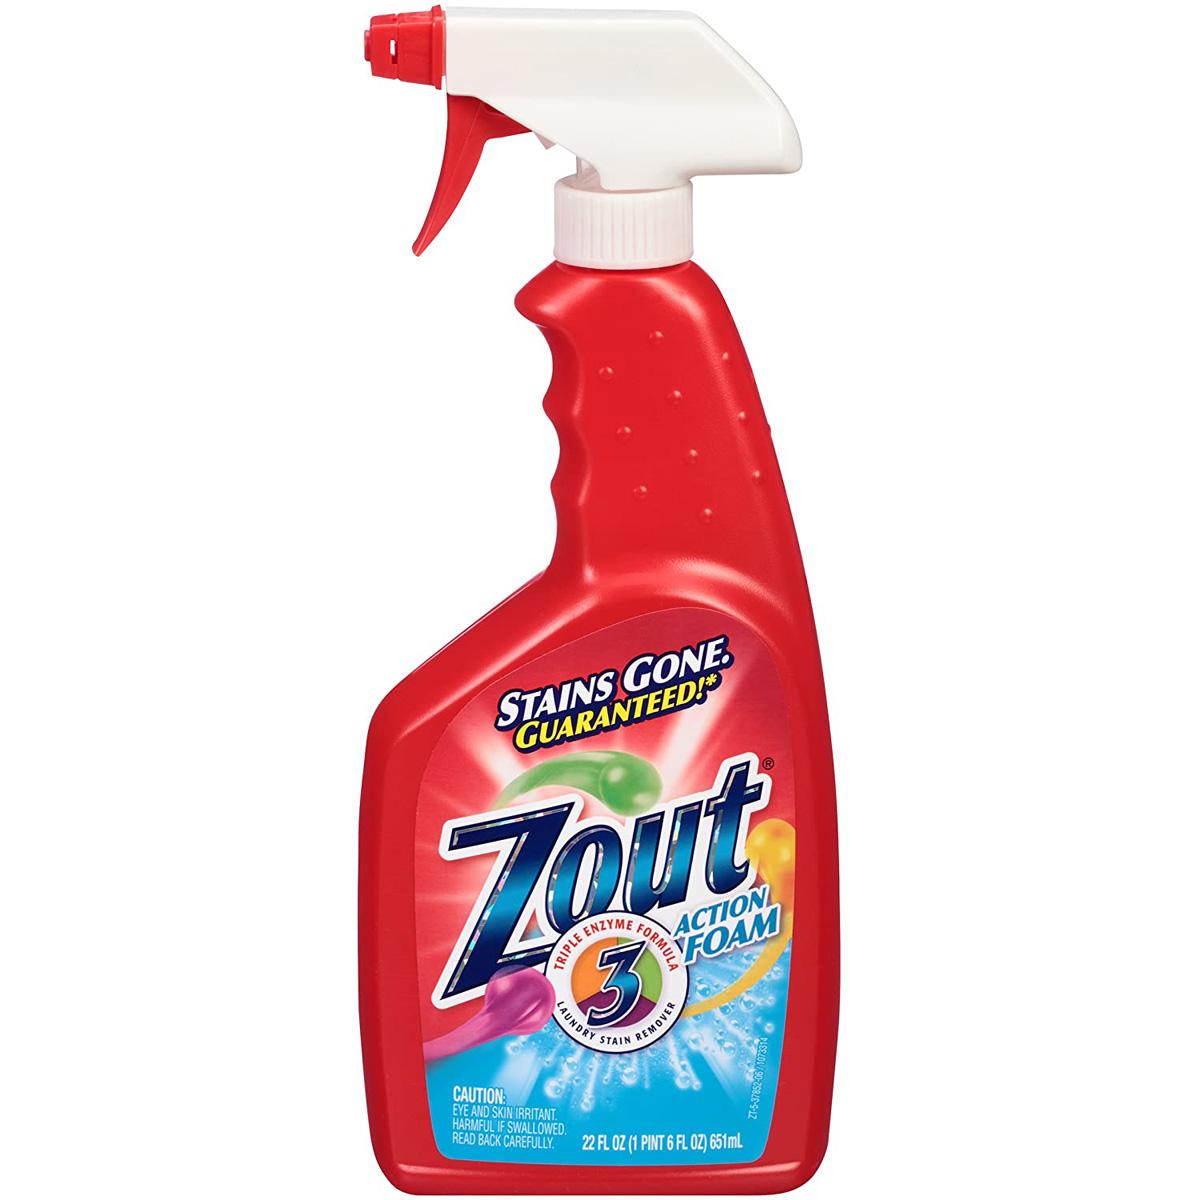 Zout Triple Enzyme Formula Laundry Stain Remover Foam for $2.93 Shipped